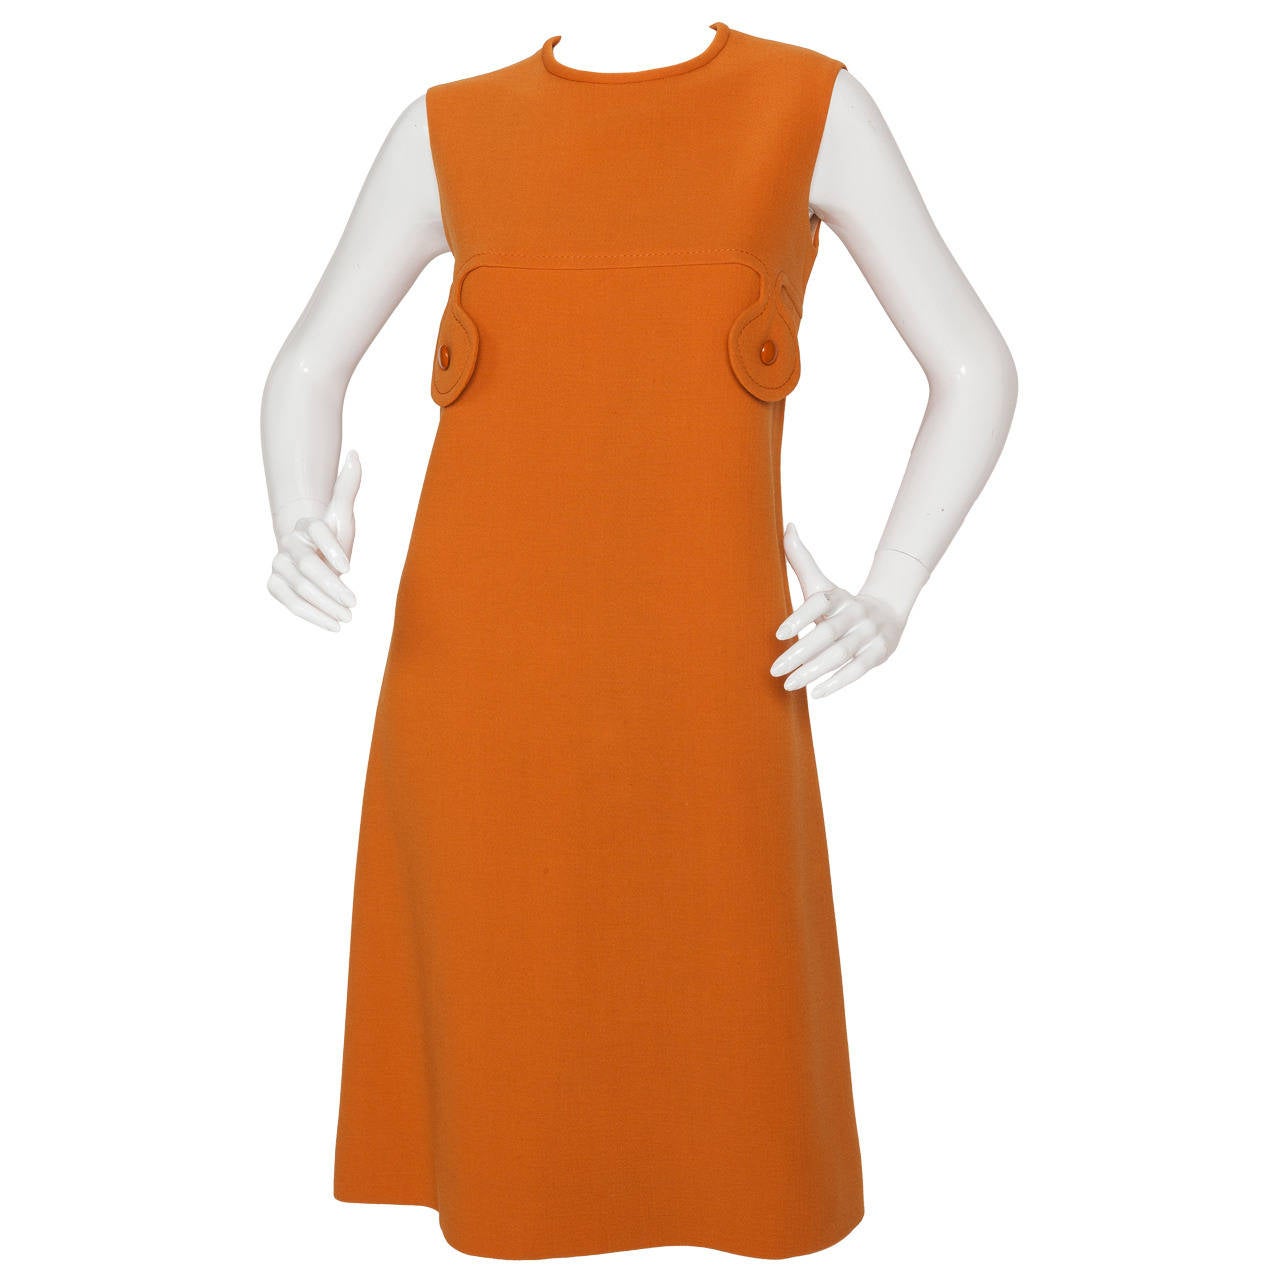 A circa 1971 Pierre Cardin pumpkin-colored wool crepe sleeveless sheath dress with matching fitted jacket that features oversized orange matching shiny buttons and a petalled jacket collar and lapel. Lined with 